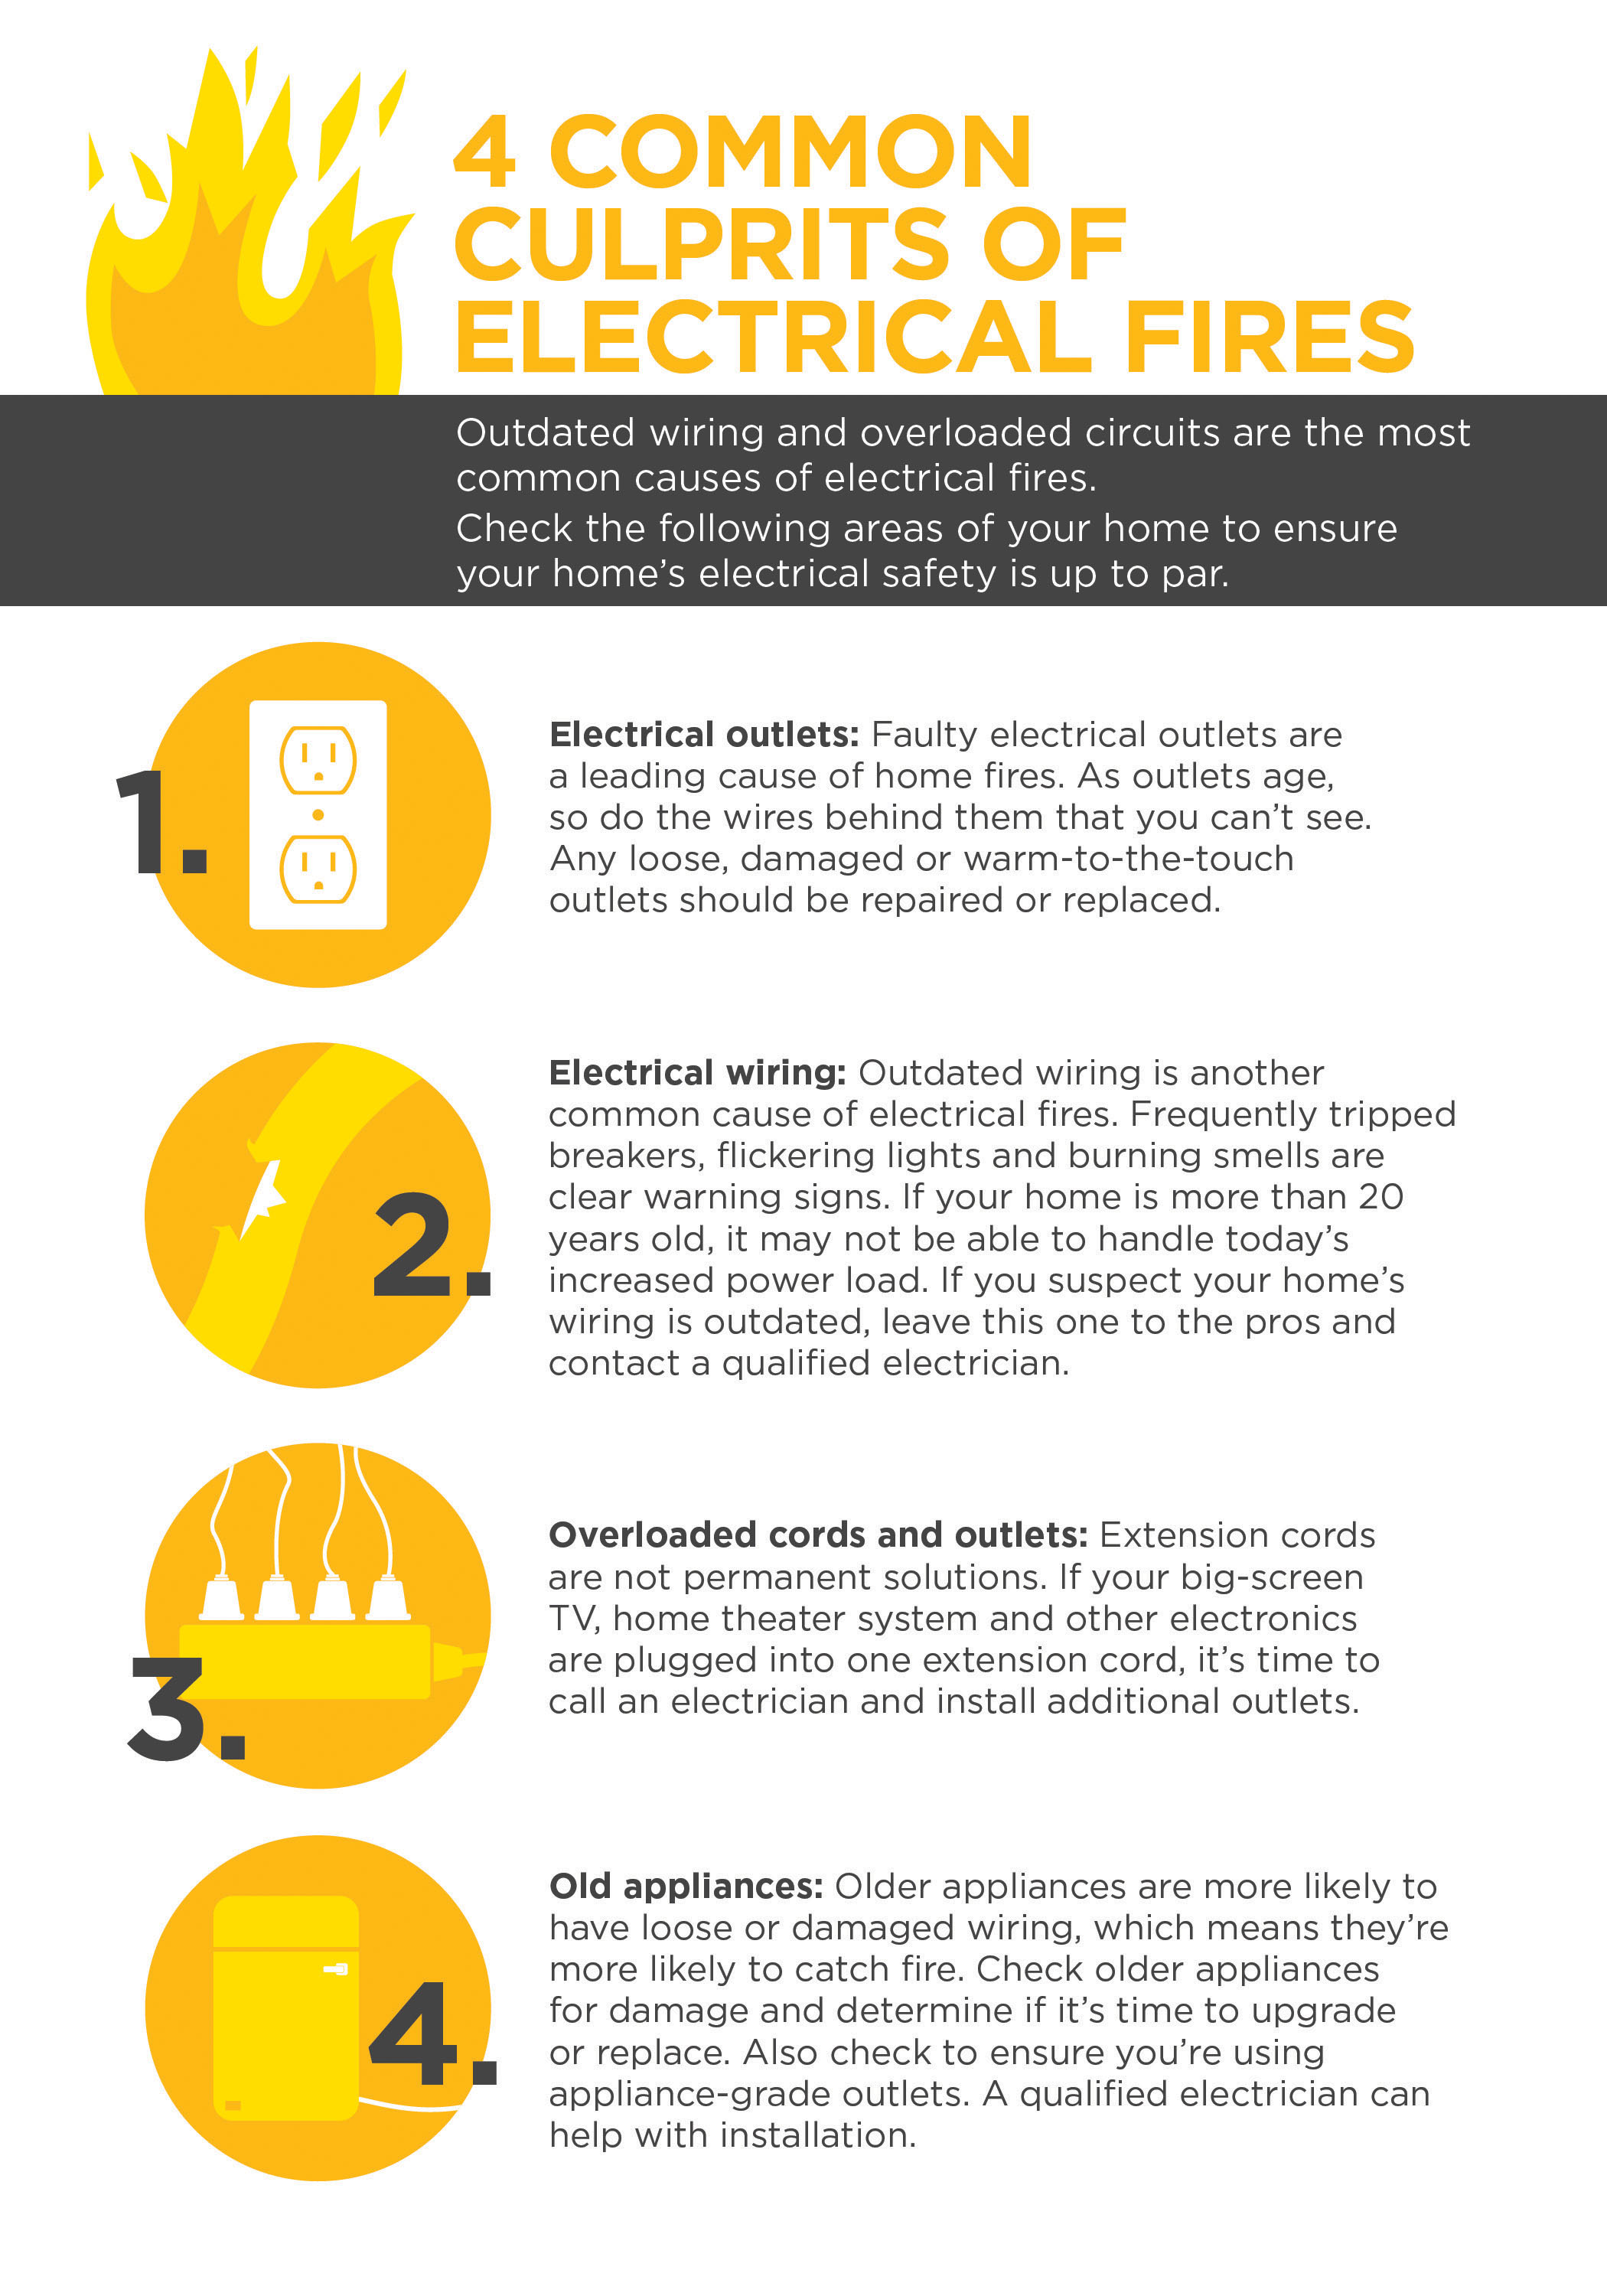 Infographic of culprits of electrical fires